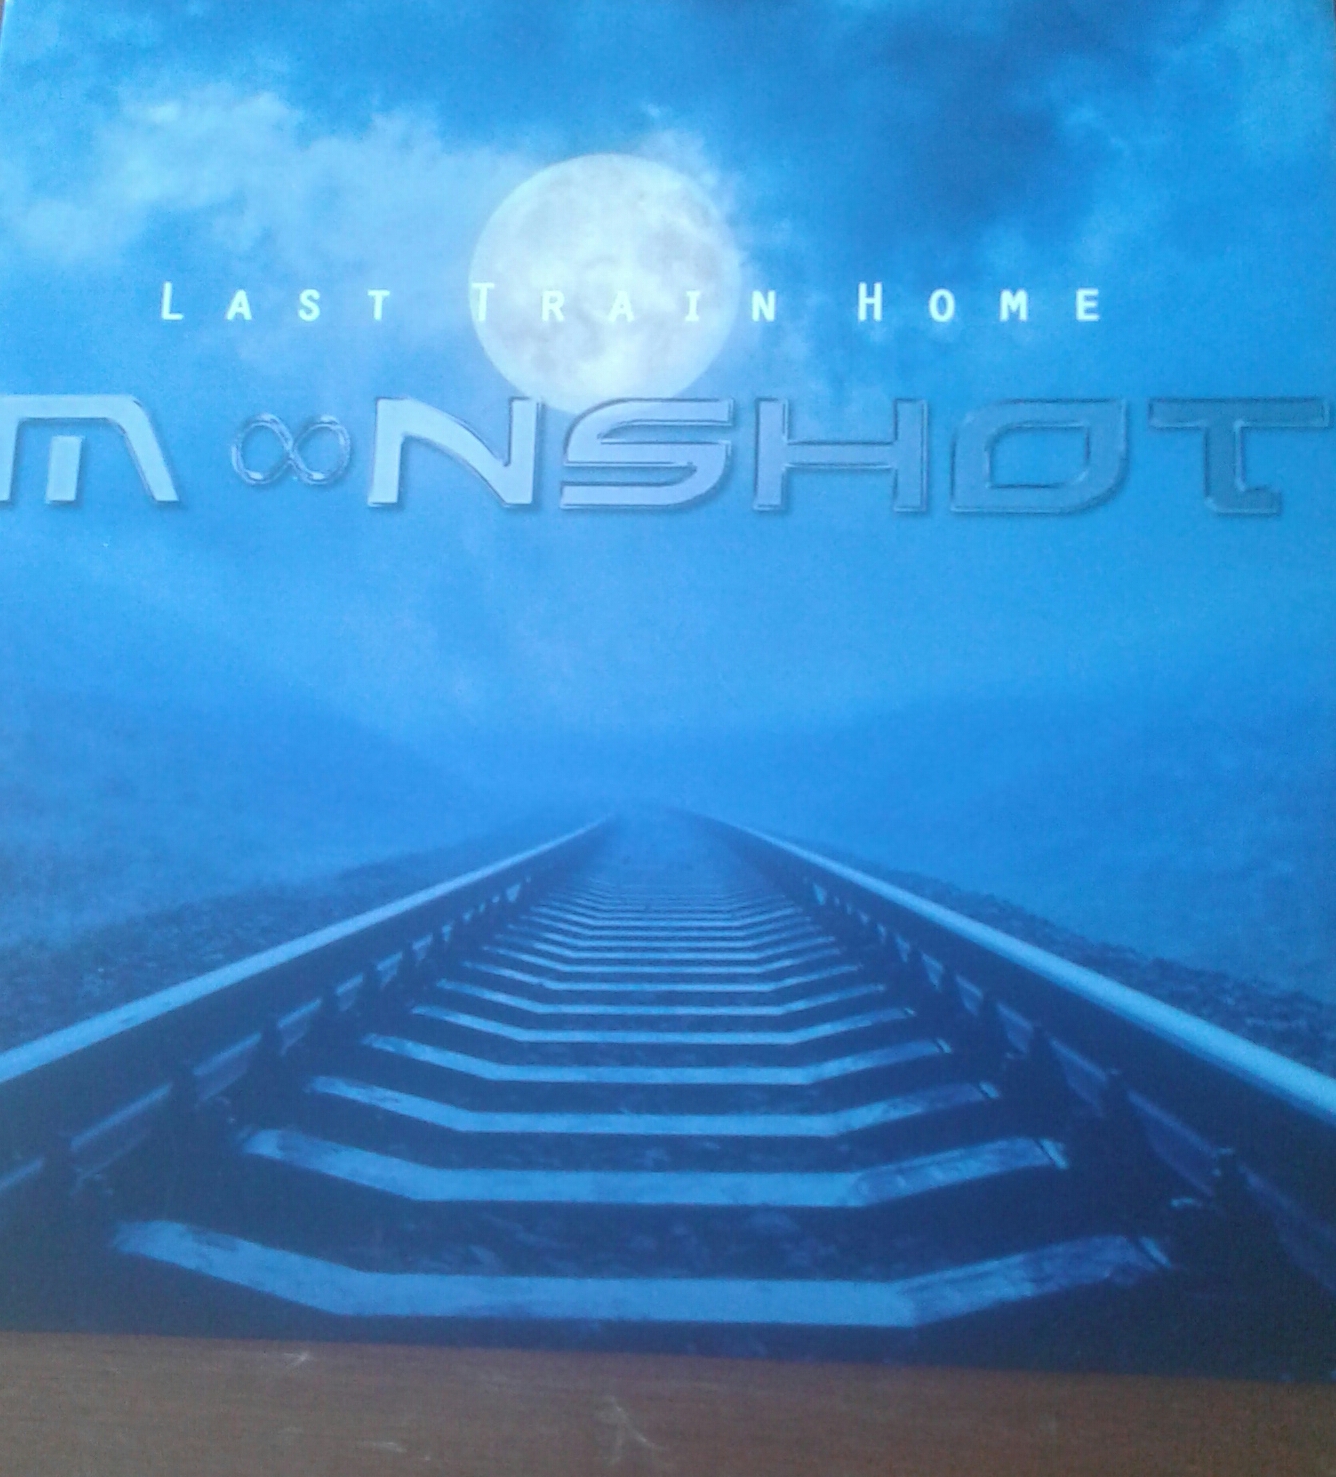 Moonshot - Last Train Home (Figure And Ground Records)